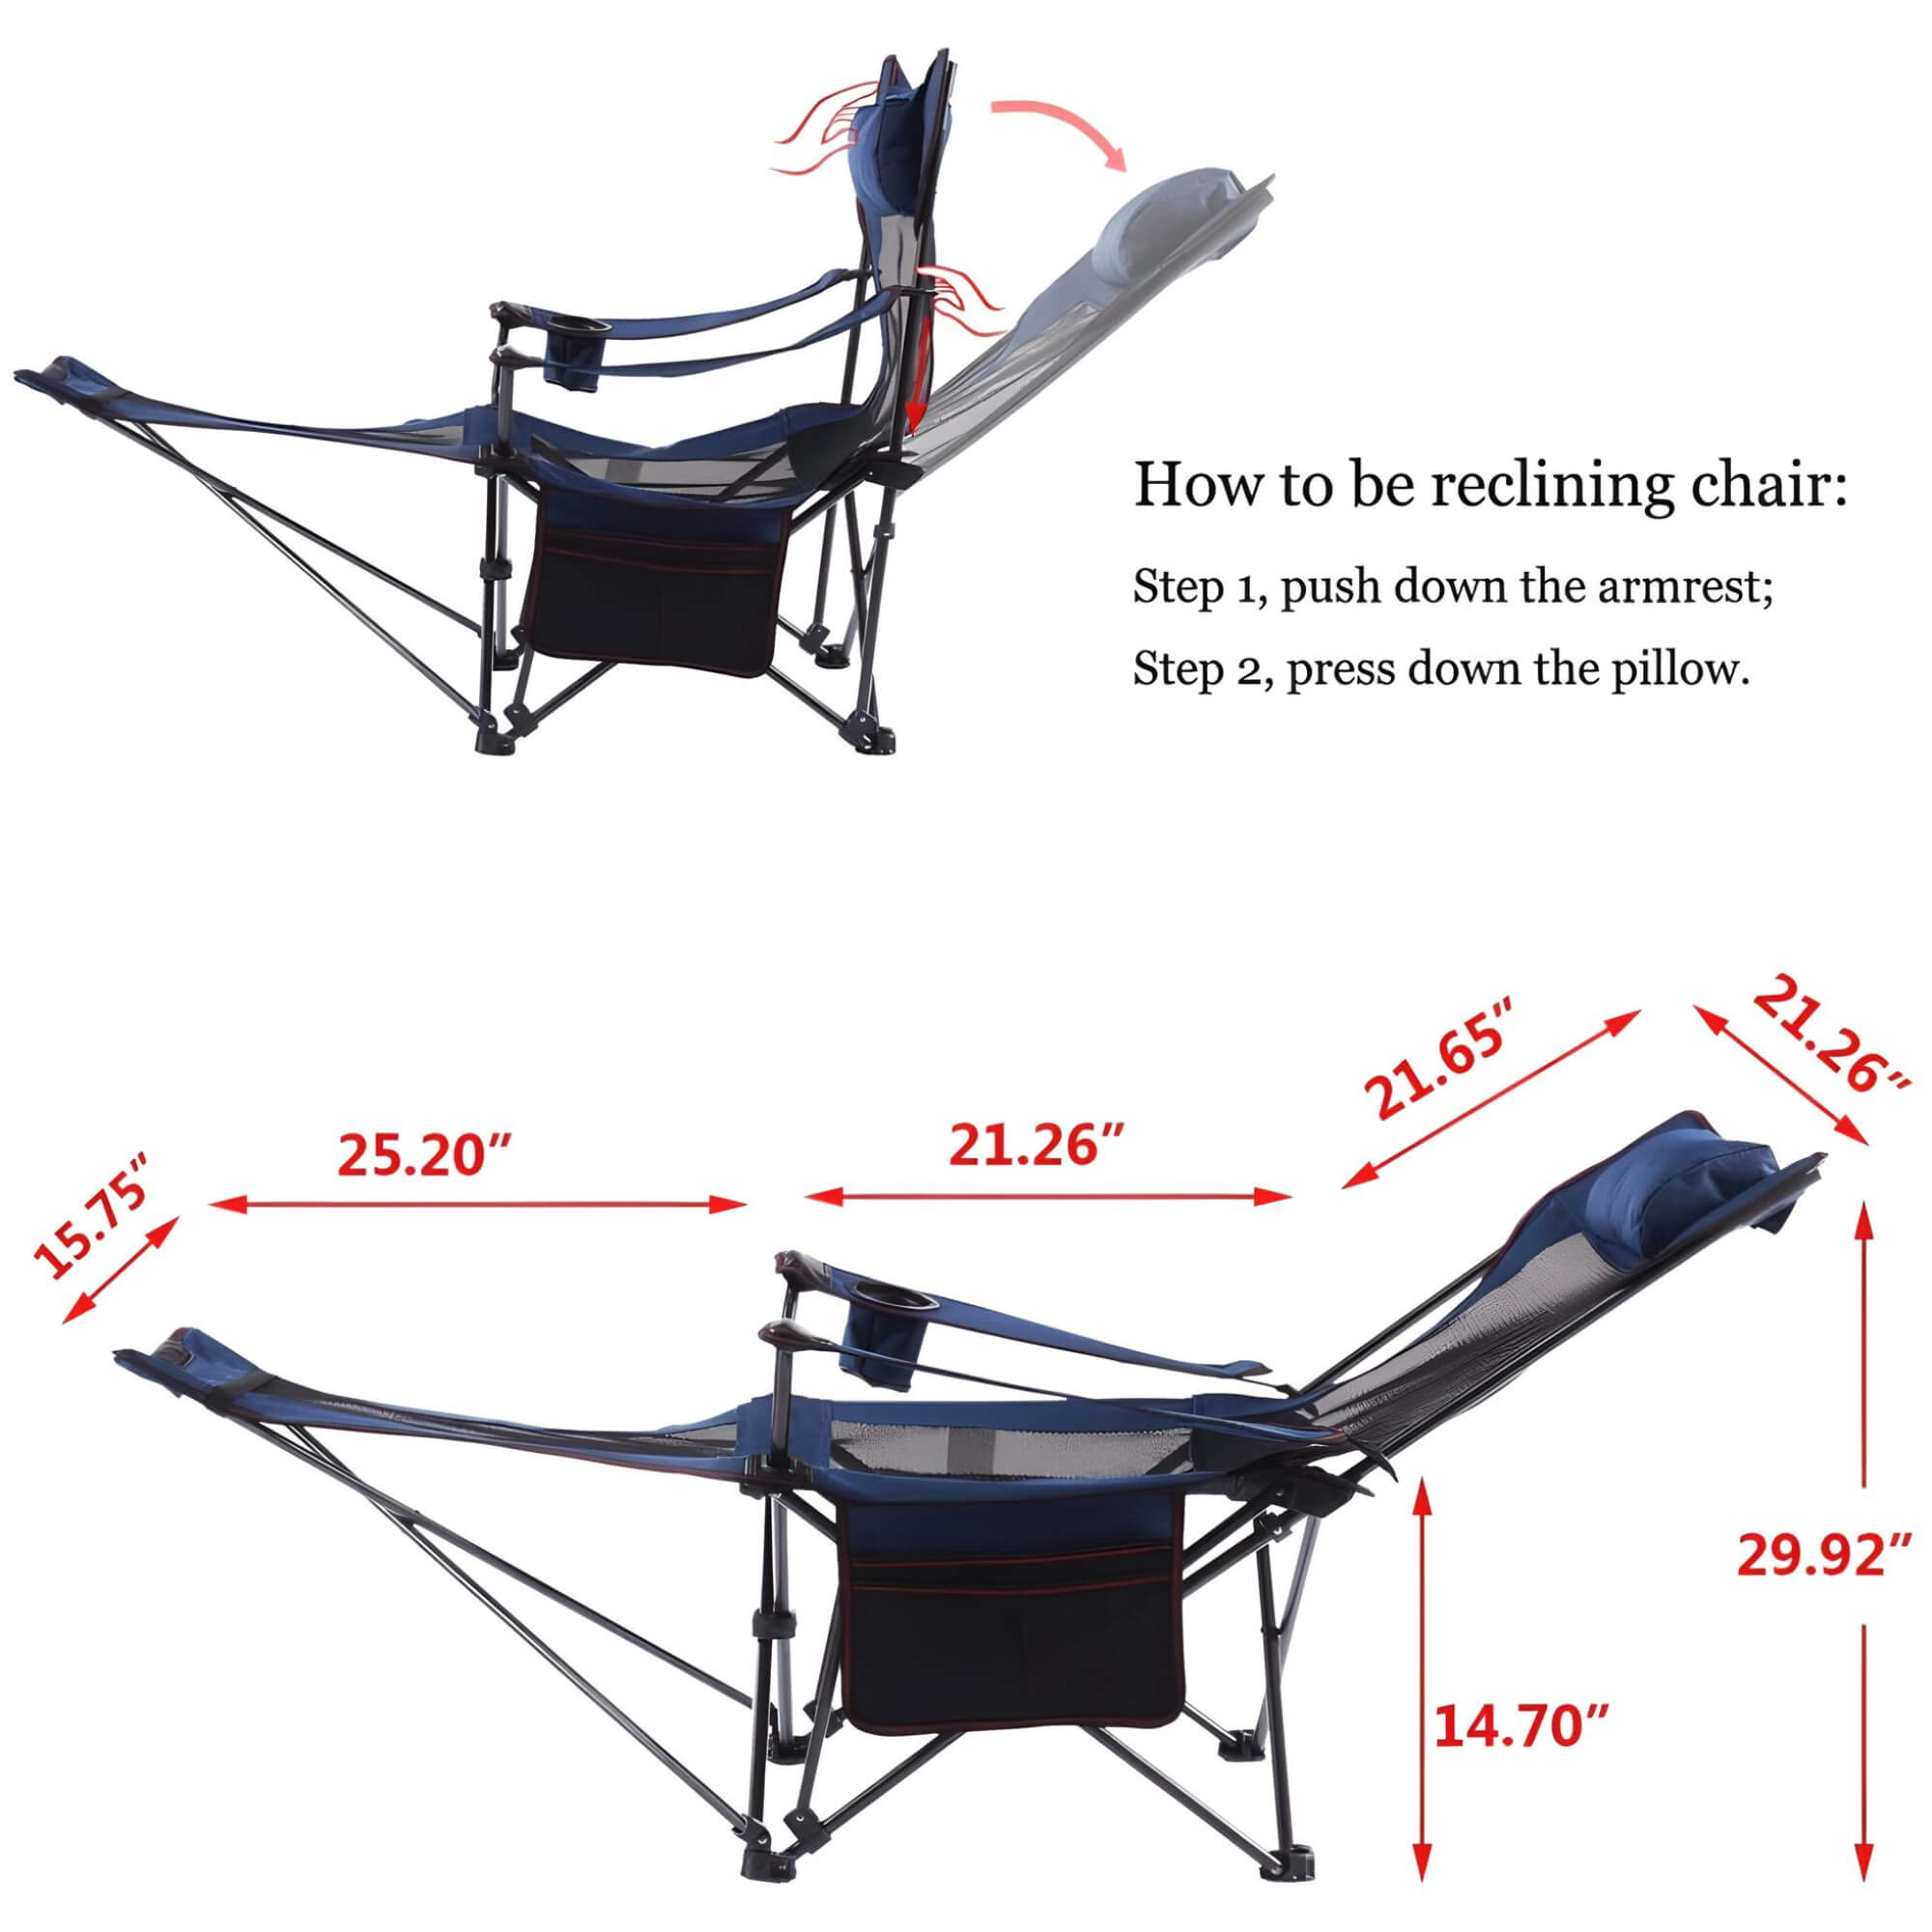 mesh-folding-lawn-chairs-how-to-do-it